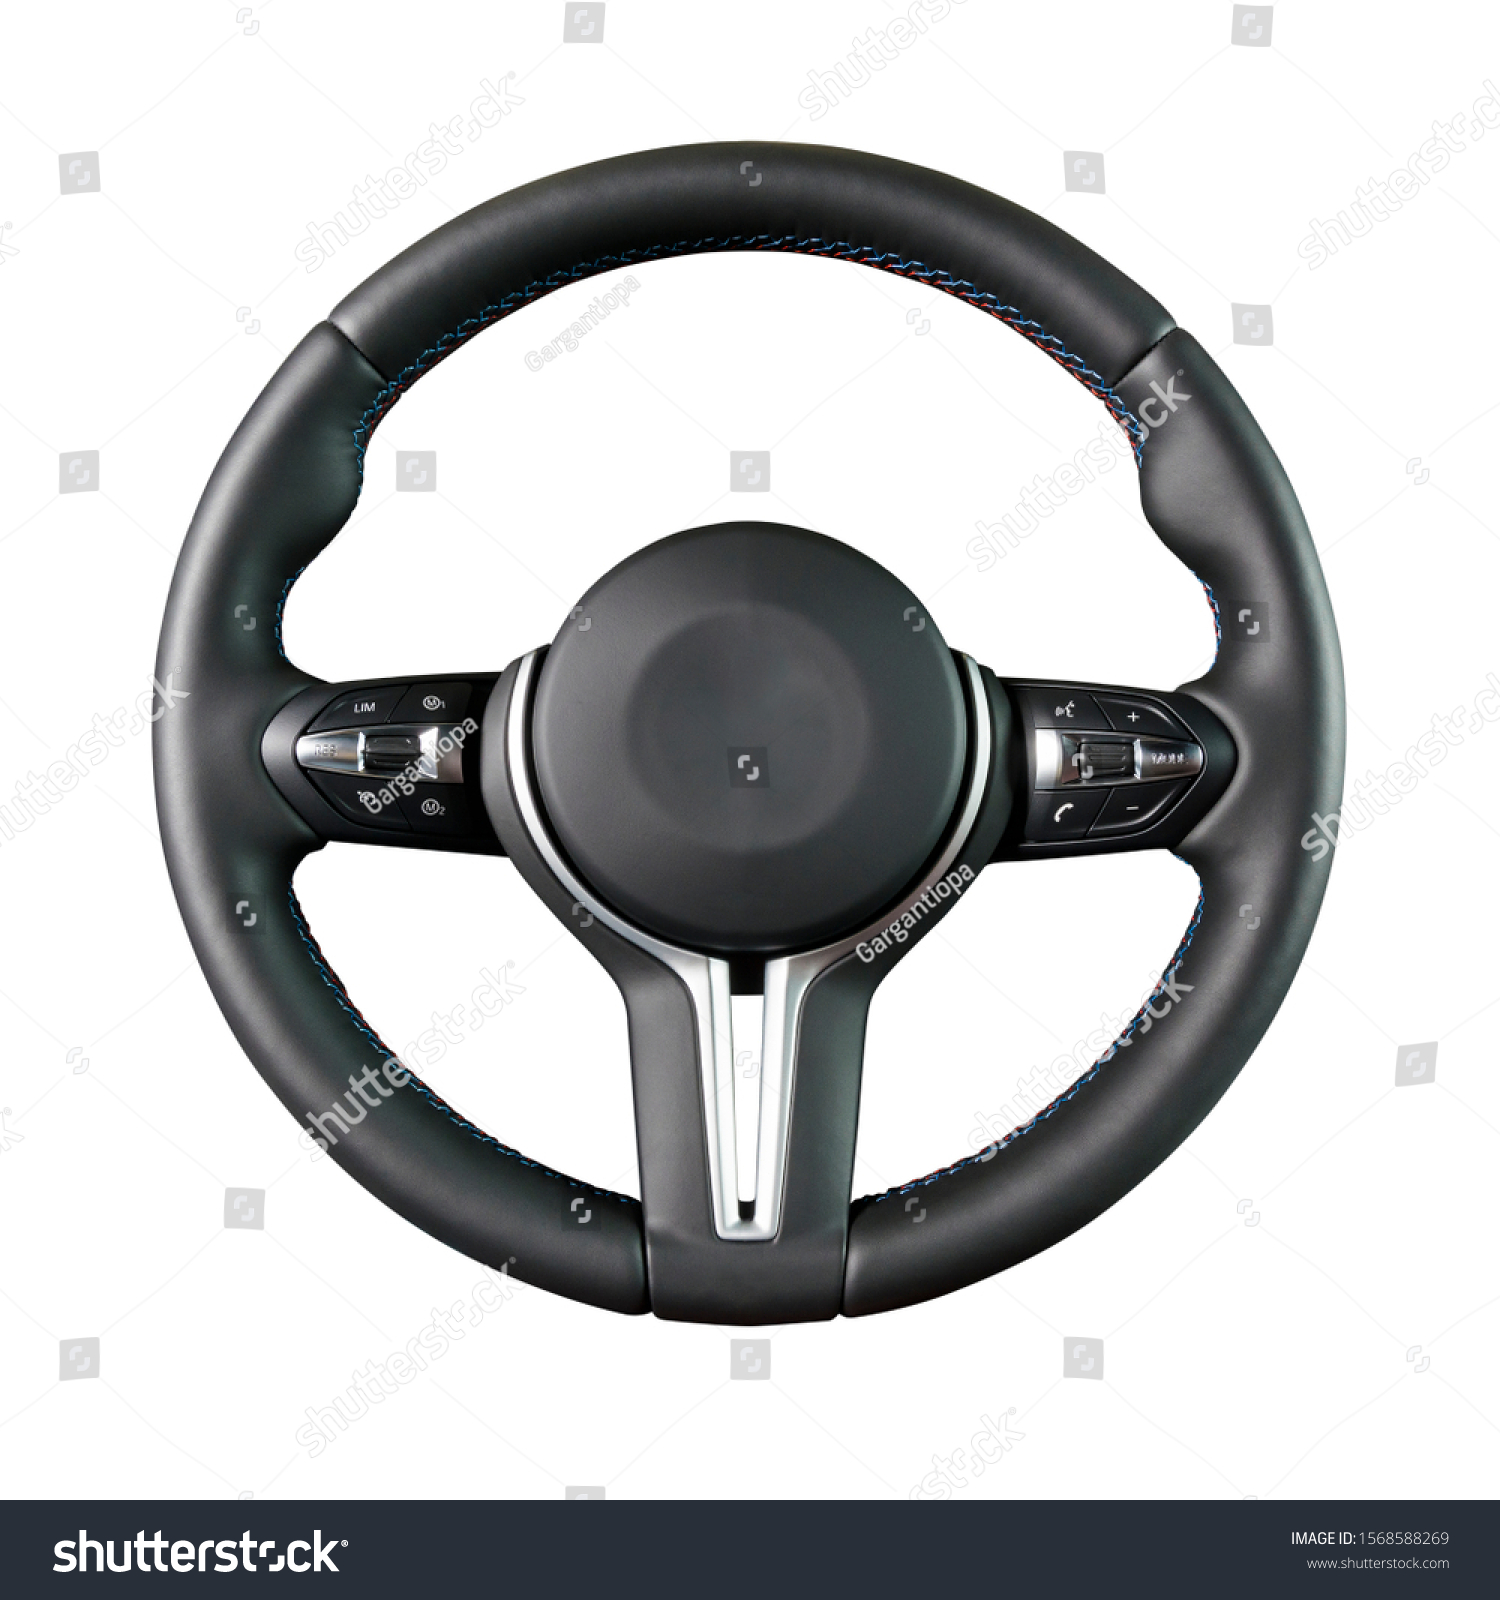 Steering wheel, isolated on the white background #1568588269